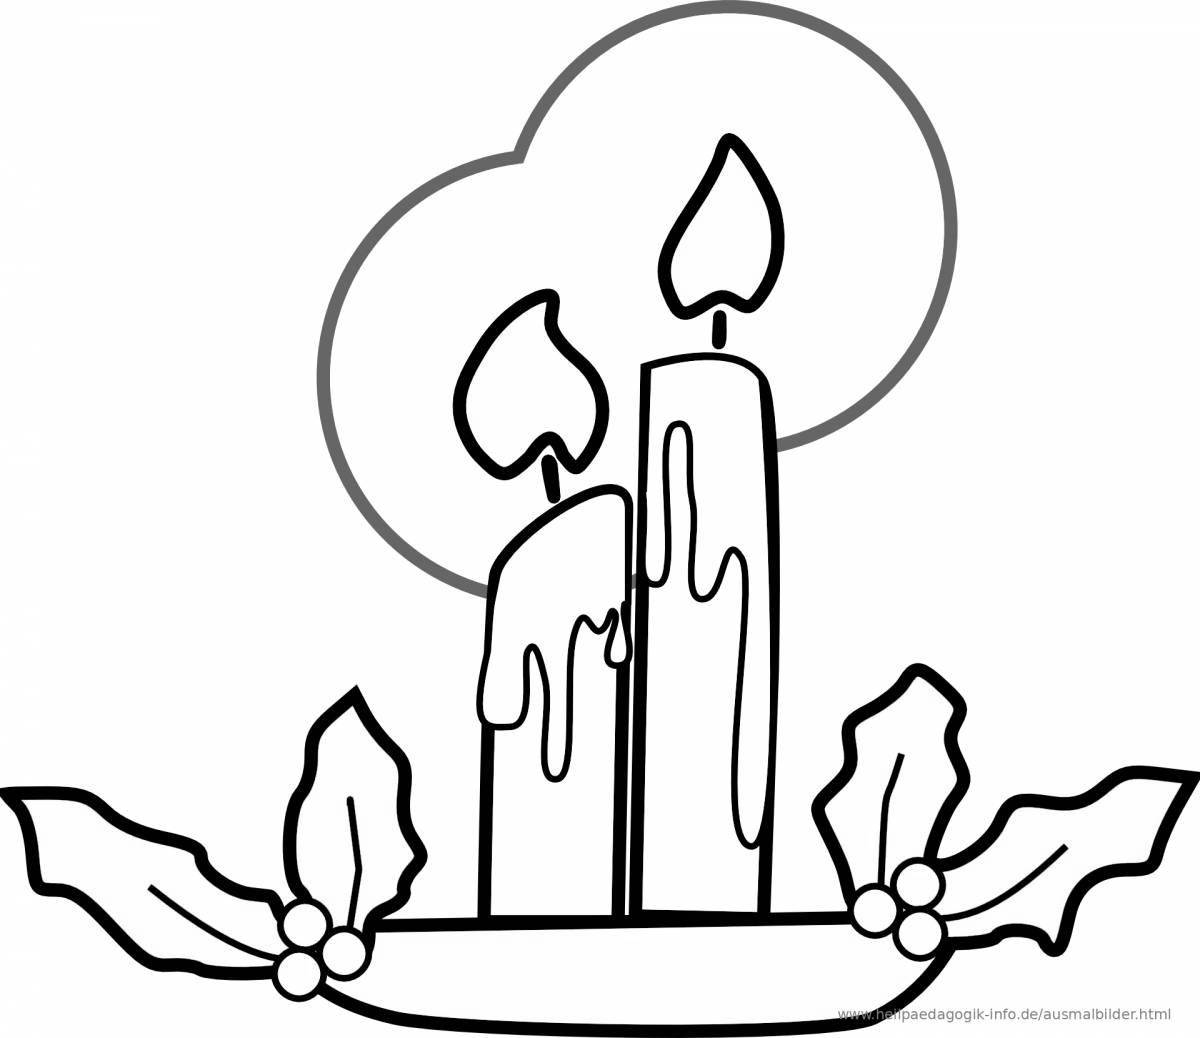 Children memory candle coloring page